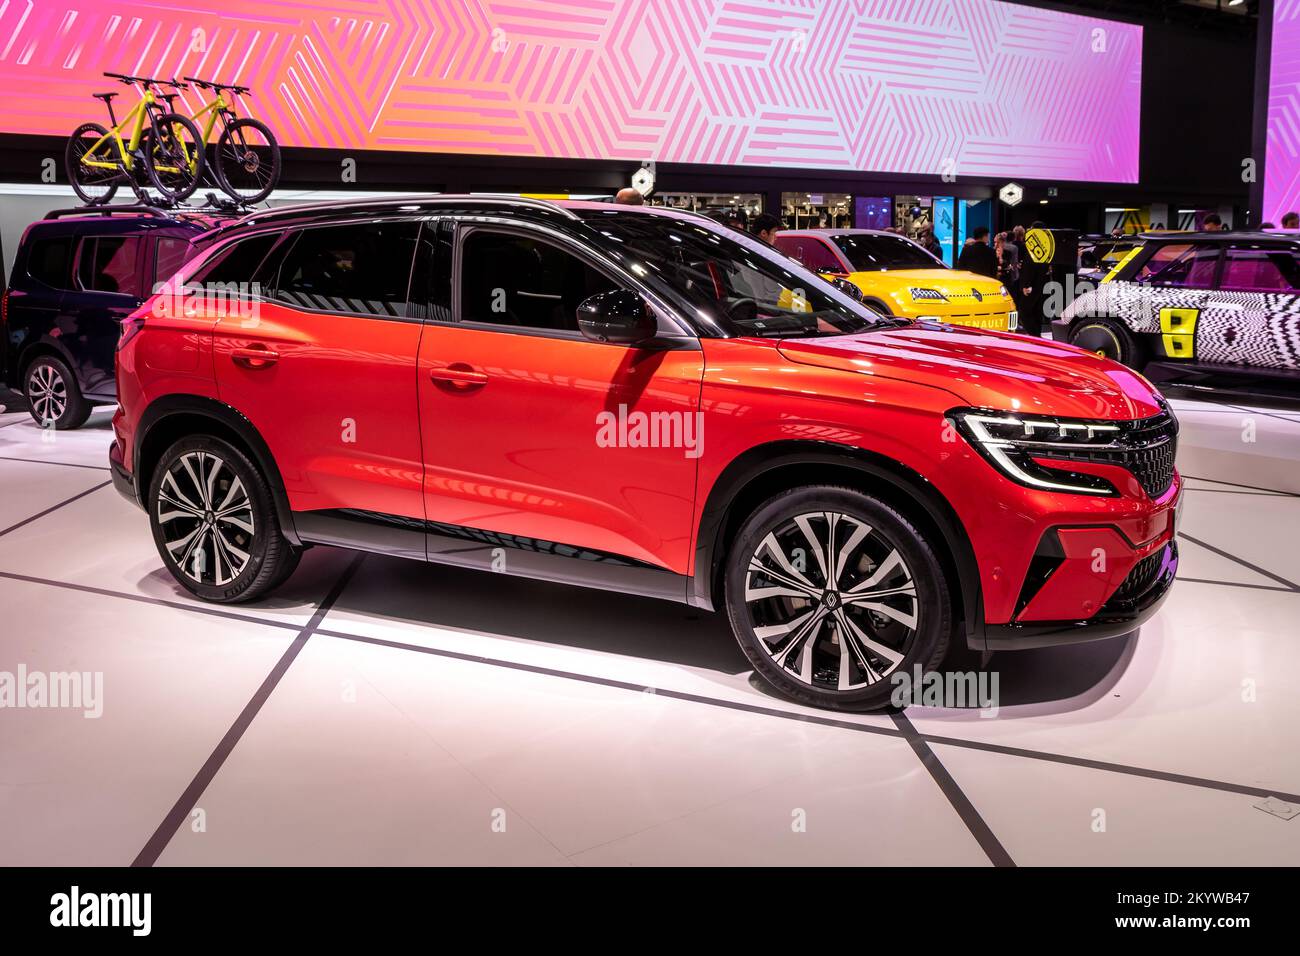 Renault Austral SUV E-Tech hybrid car showcased at the Paris Motor Show, France - October 17, 2022. Stock Photo